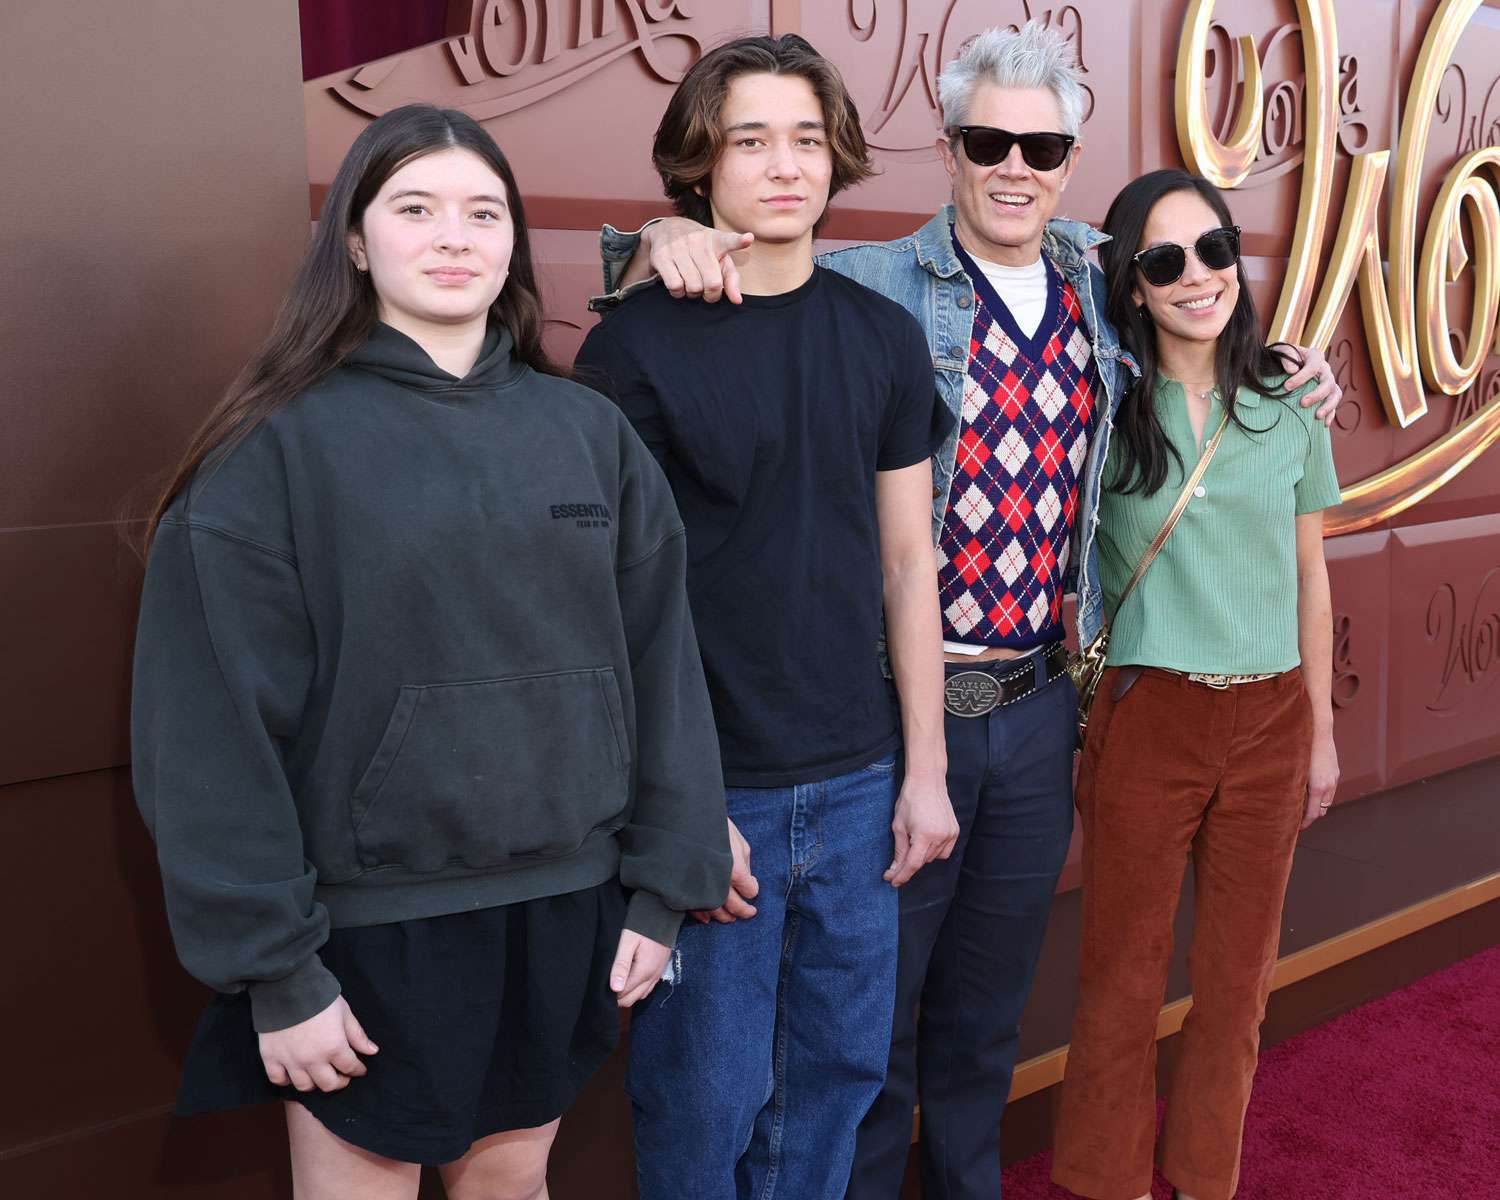 Arlo Clapp, Rocko Akira Clapp, Johnny Knoxville and Emily Ting attend the Los Angeles Premiere of Warner Bros. "Wonka" at Regency Village Theatre on December 10, 2023